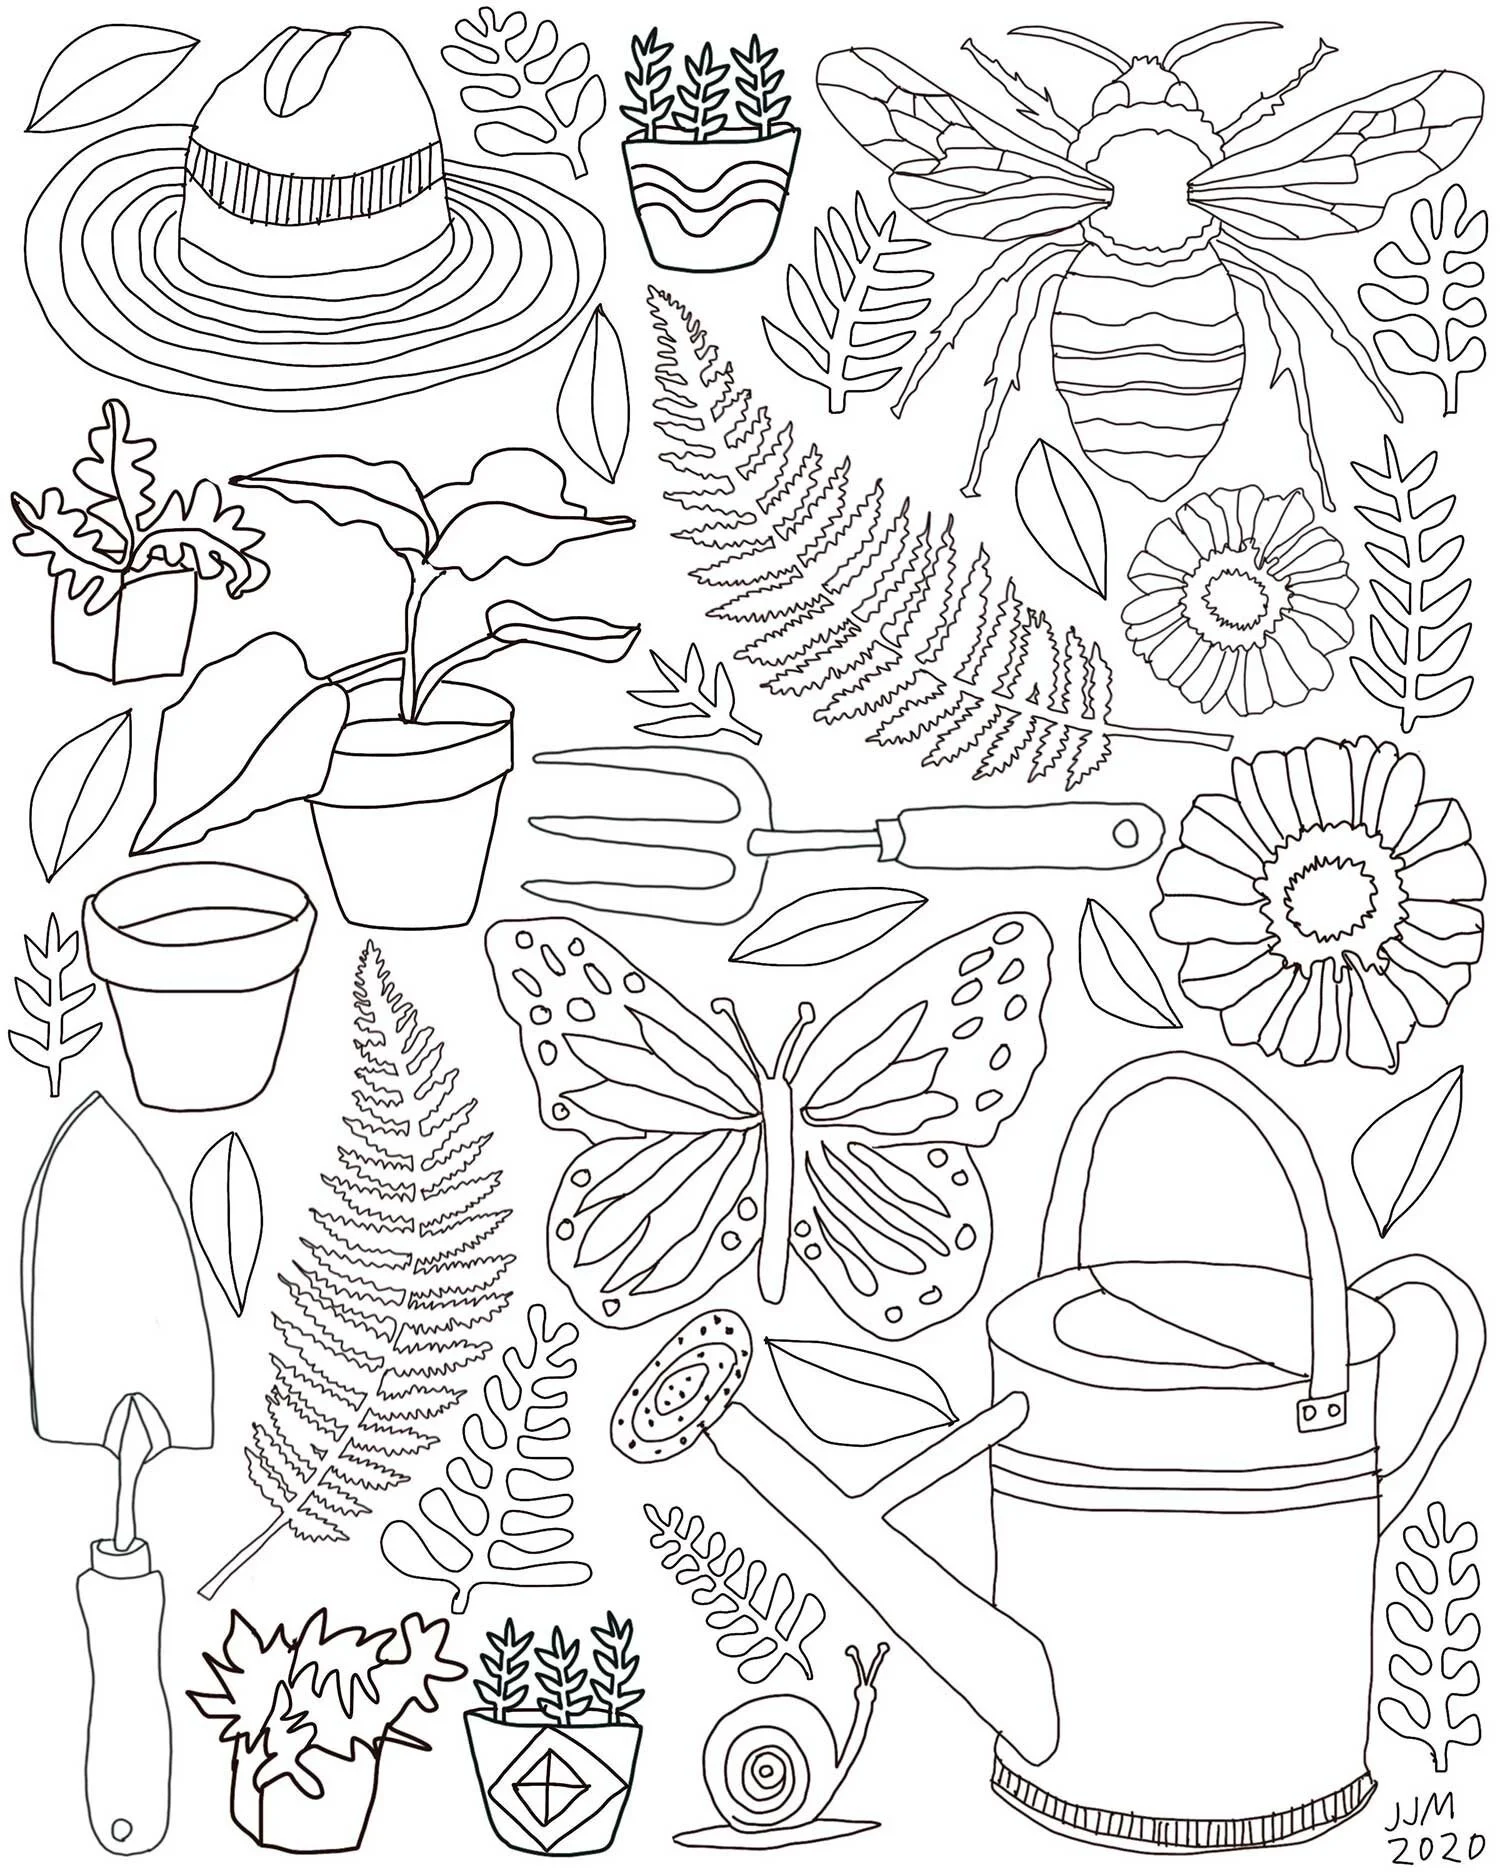 Skincare Coloring Pages